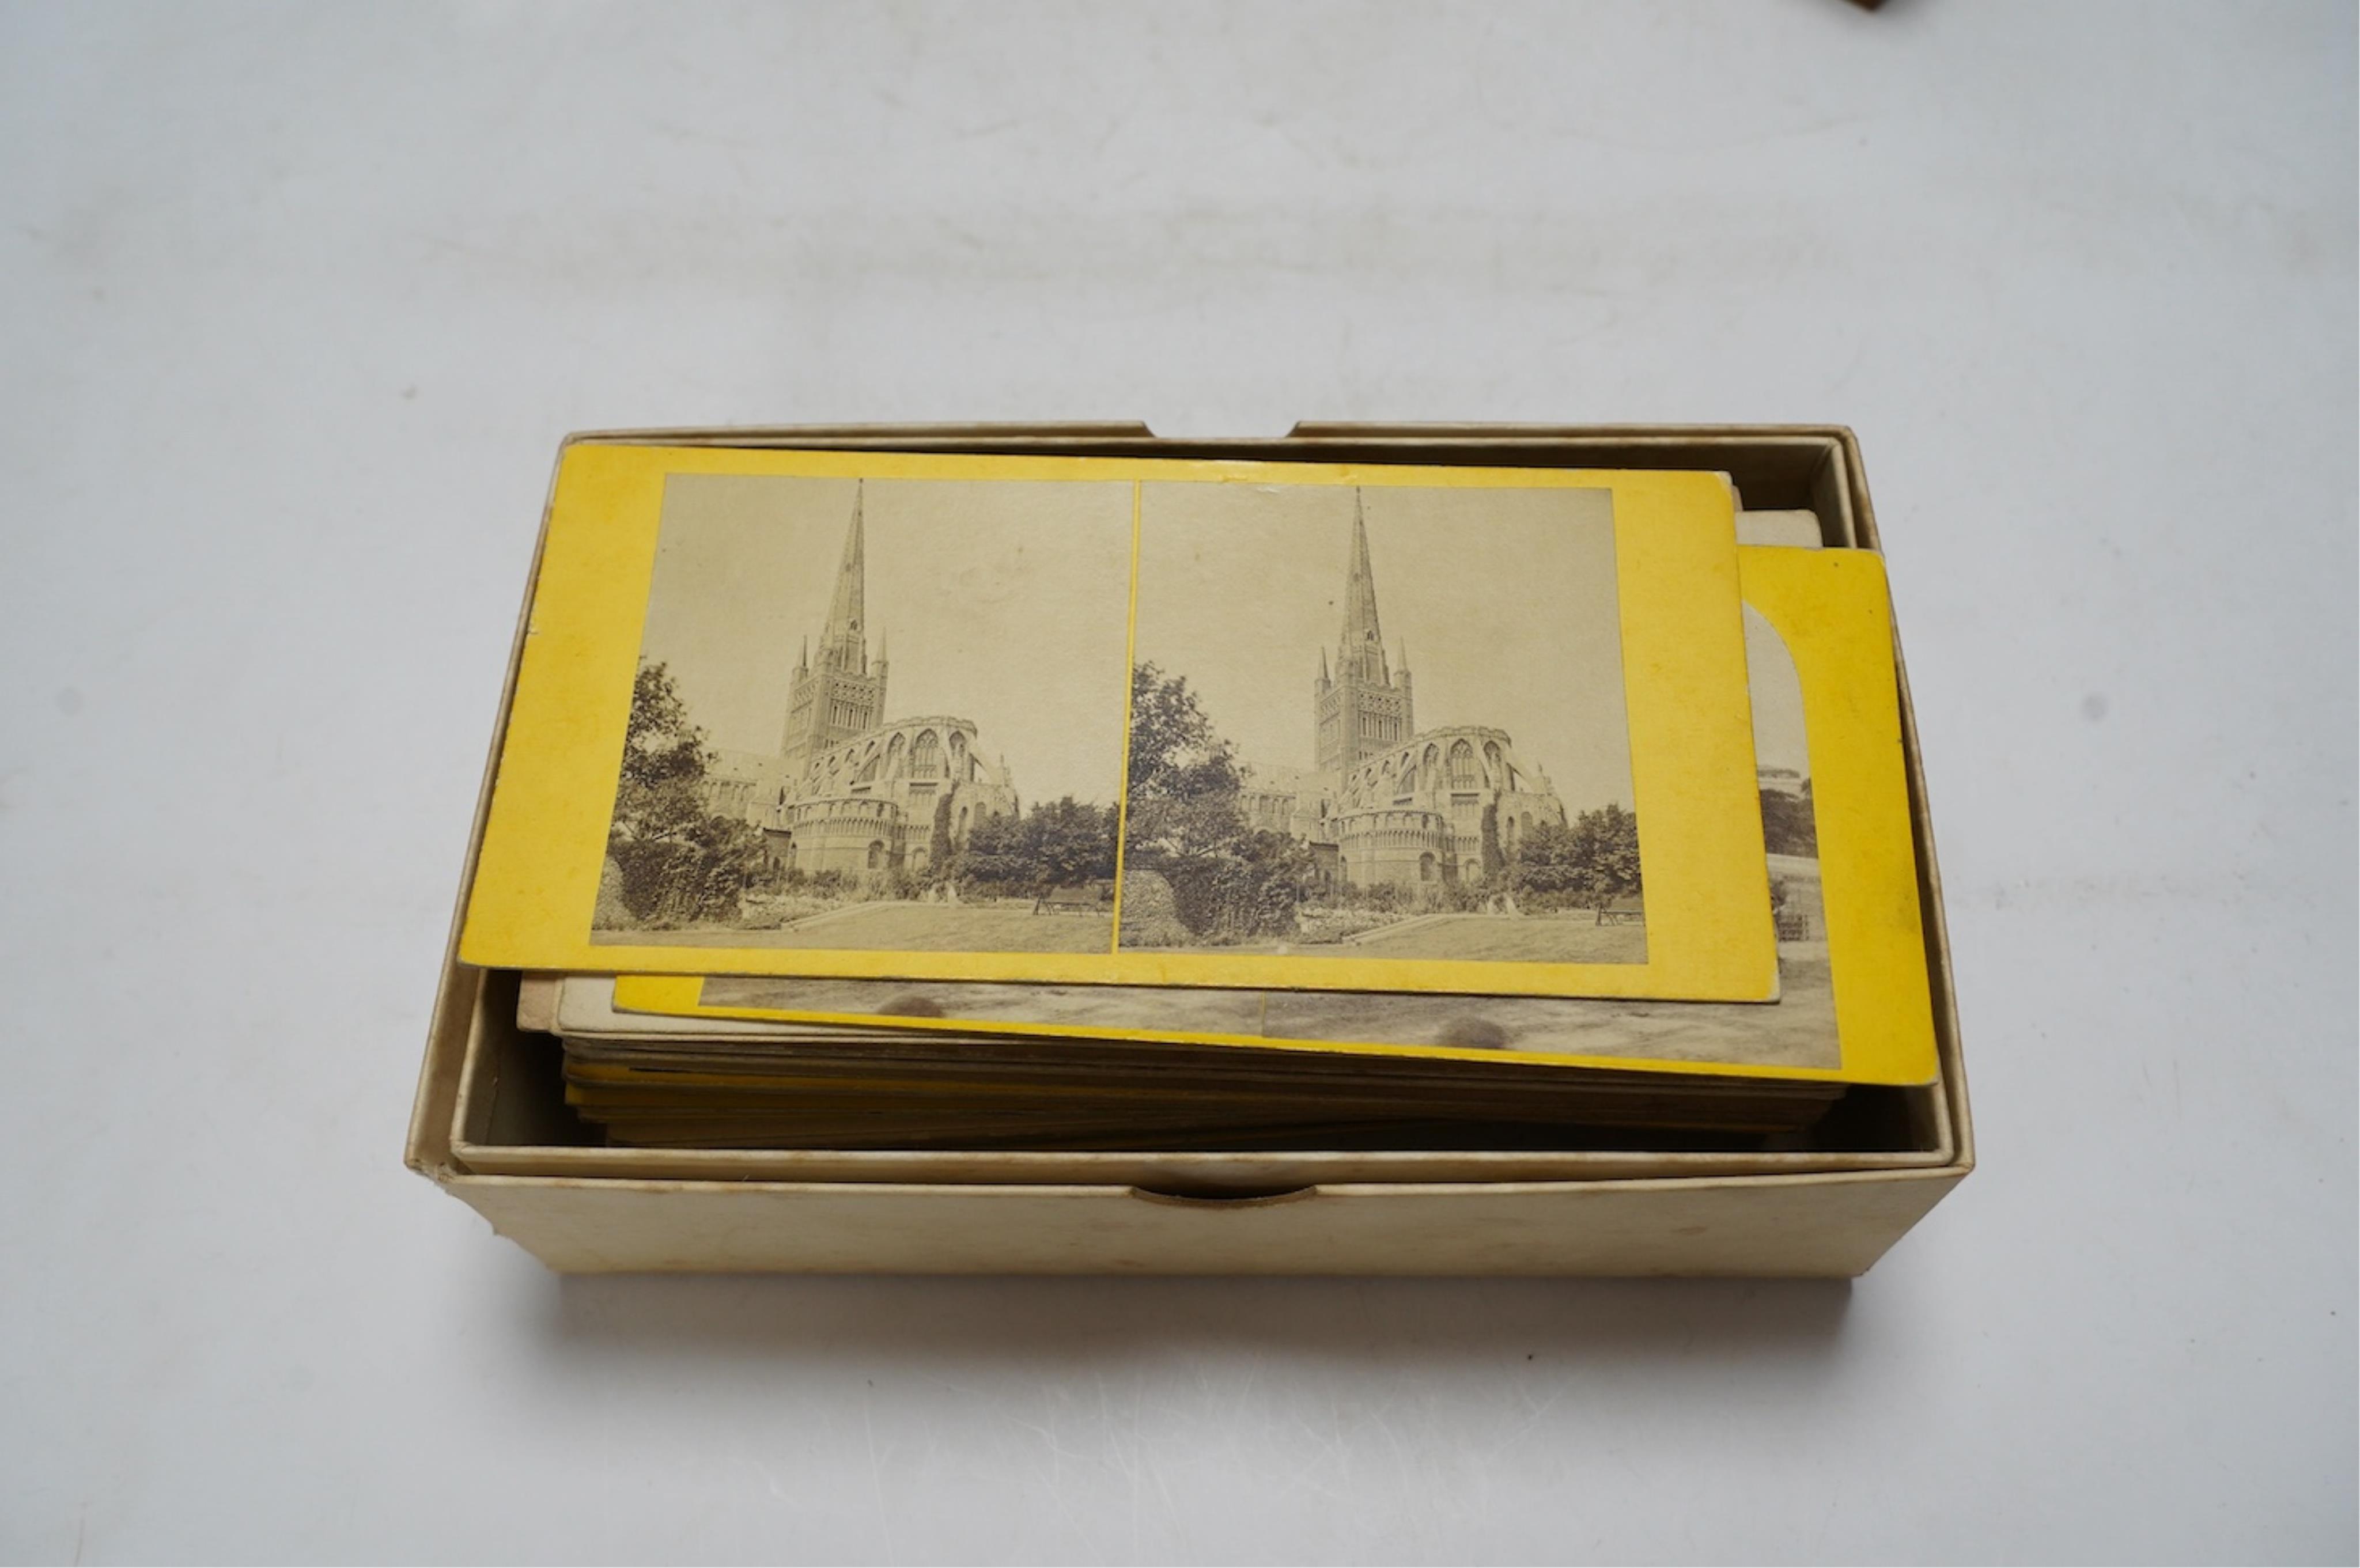 A late 19th century cased stereoscopic viewer together with topographical and other cards. Condition - fair